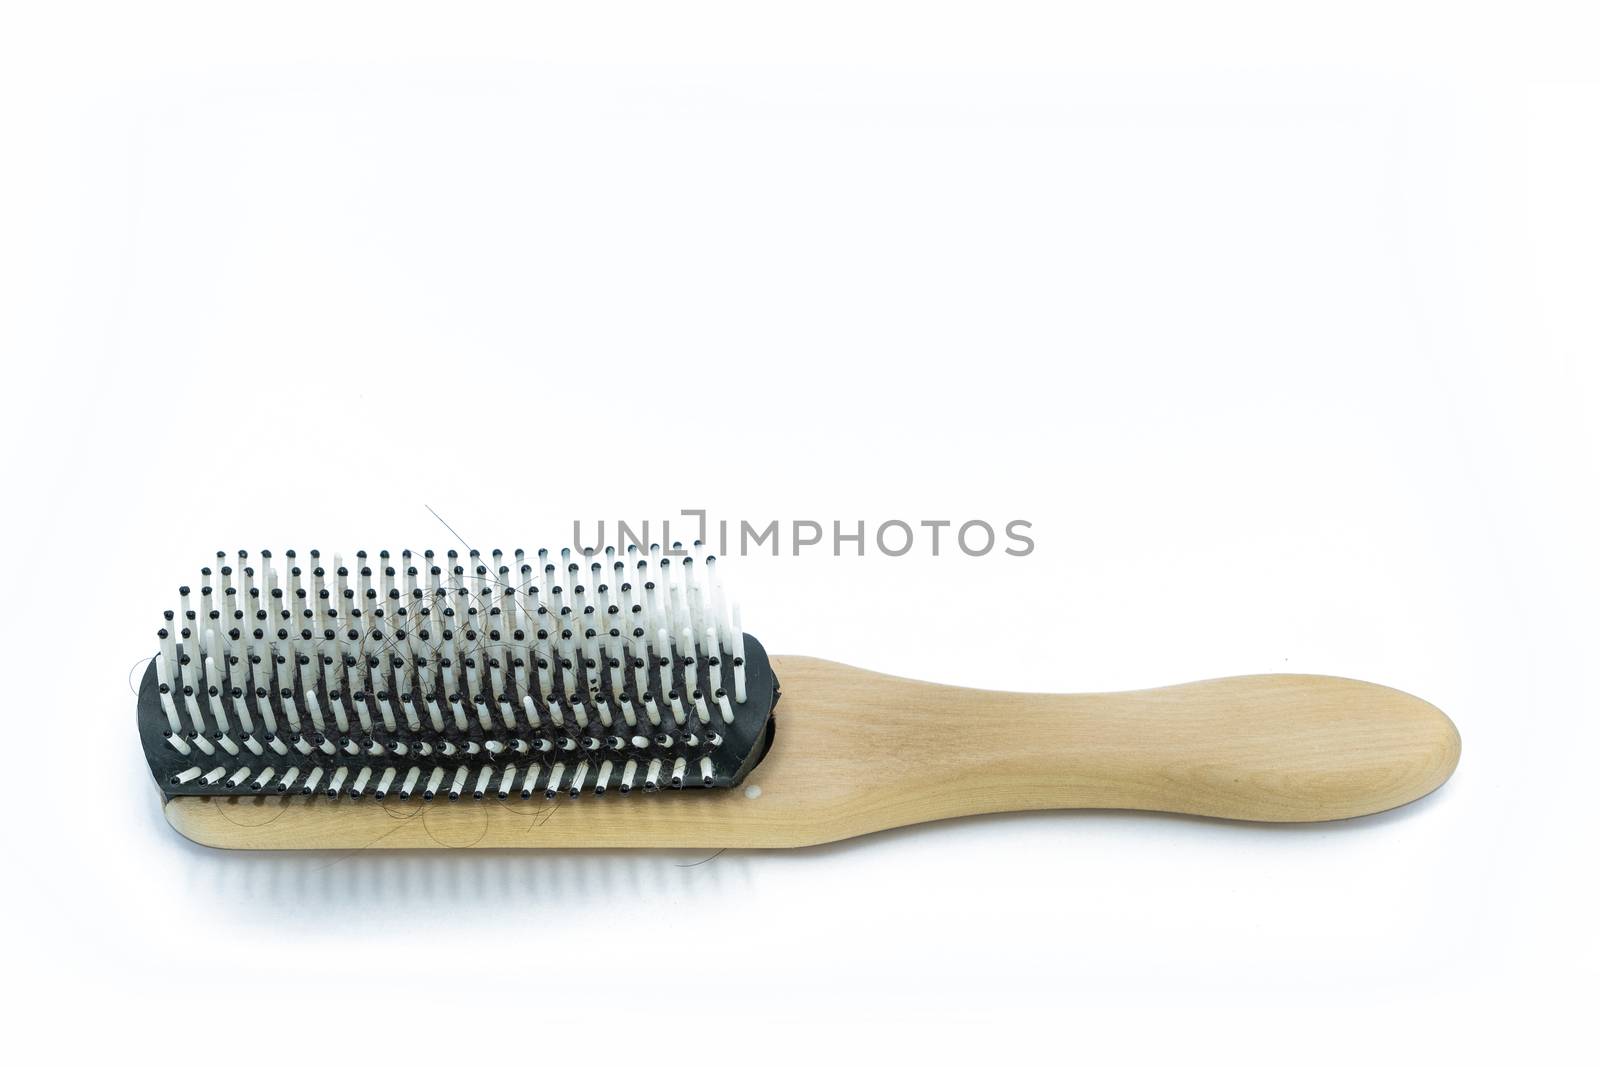 A Wooden handle Comb with hairs loss on white background.